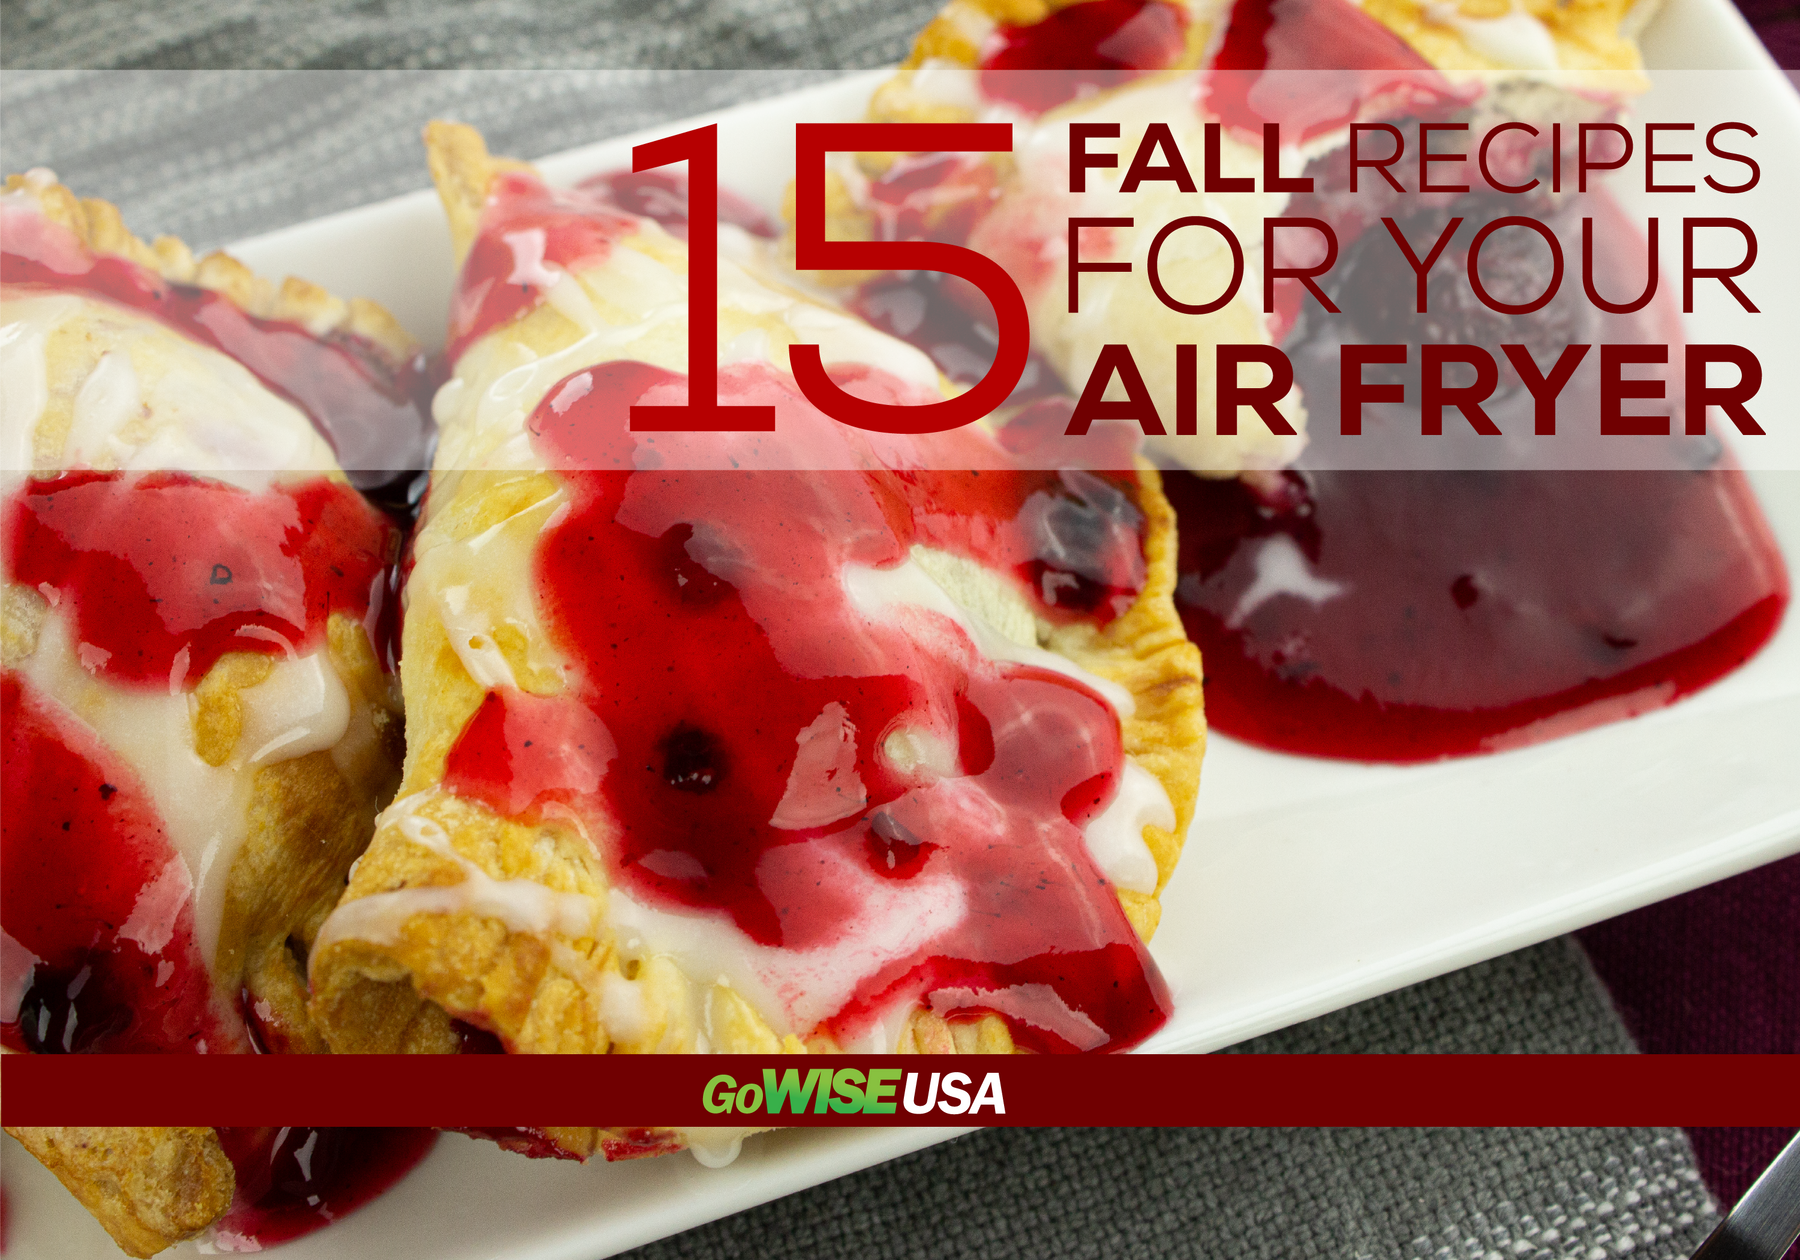 15 Fall Recipes for Your Air Fryer (Digital Download) - GoWISE USA